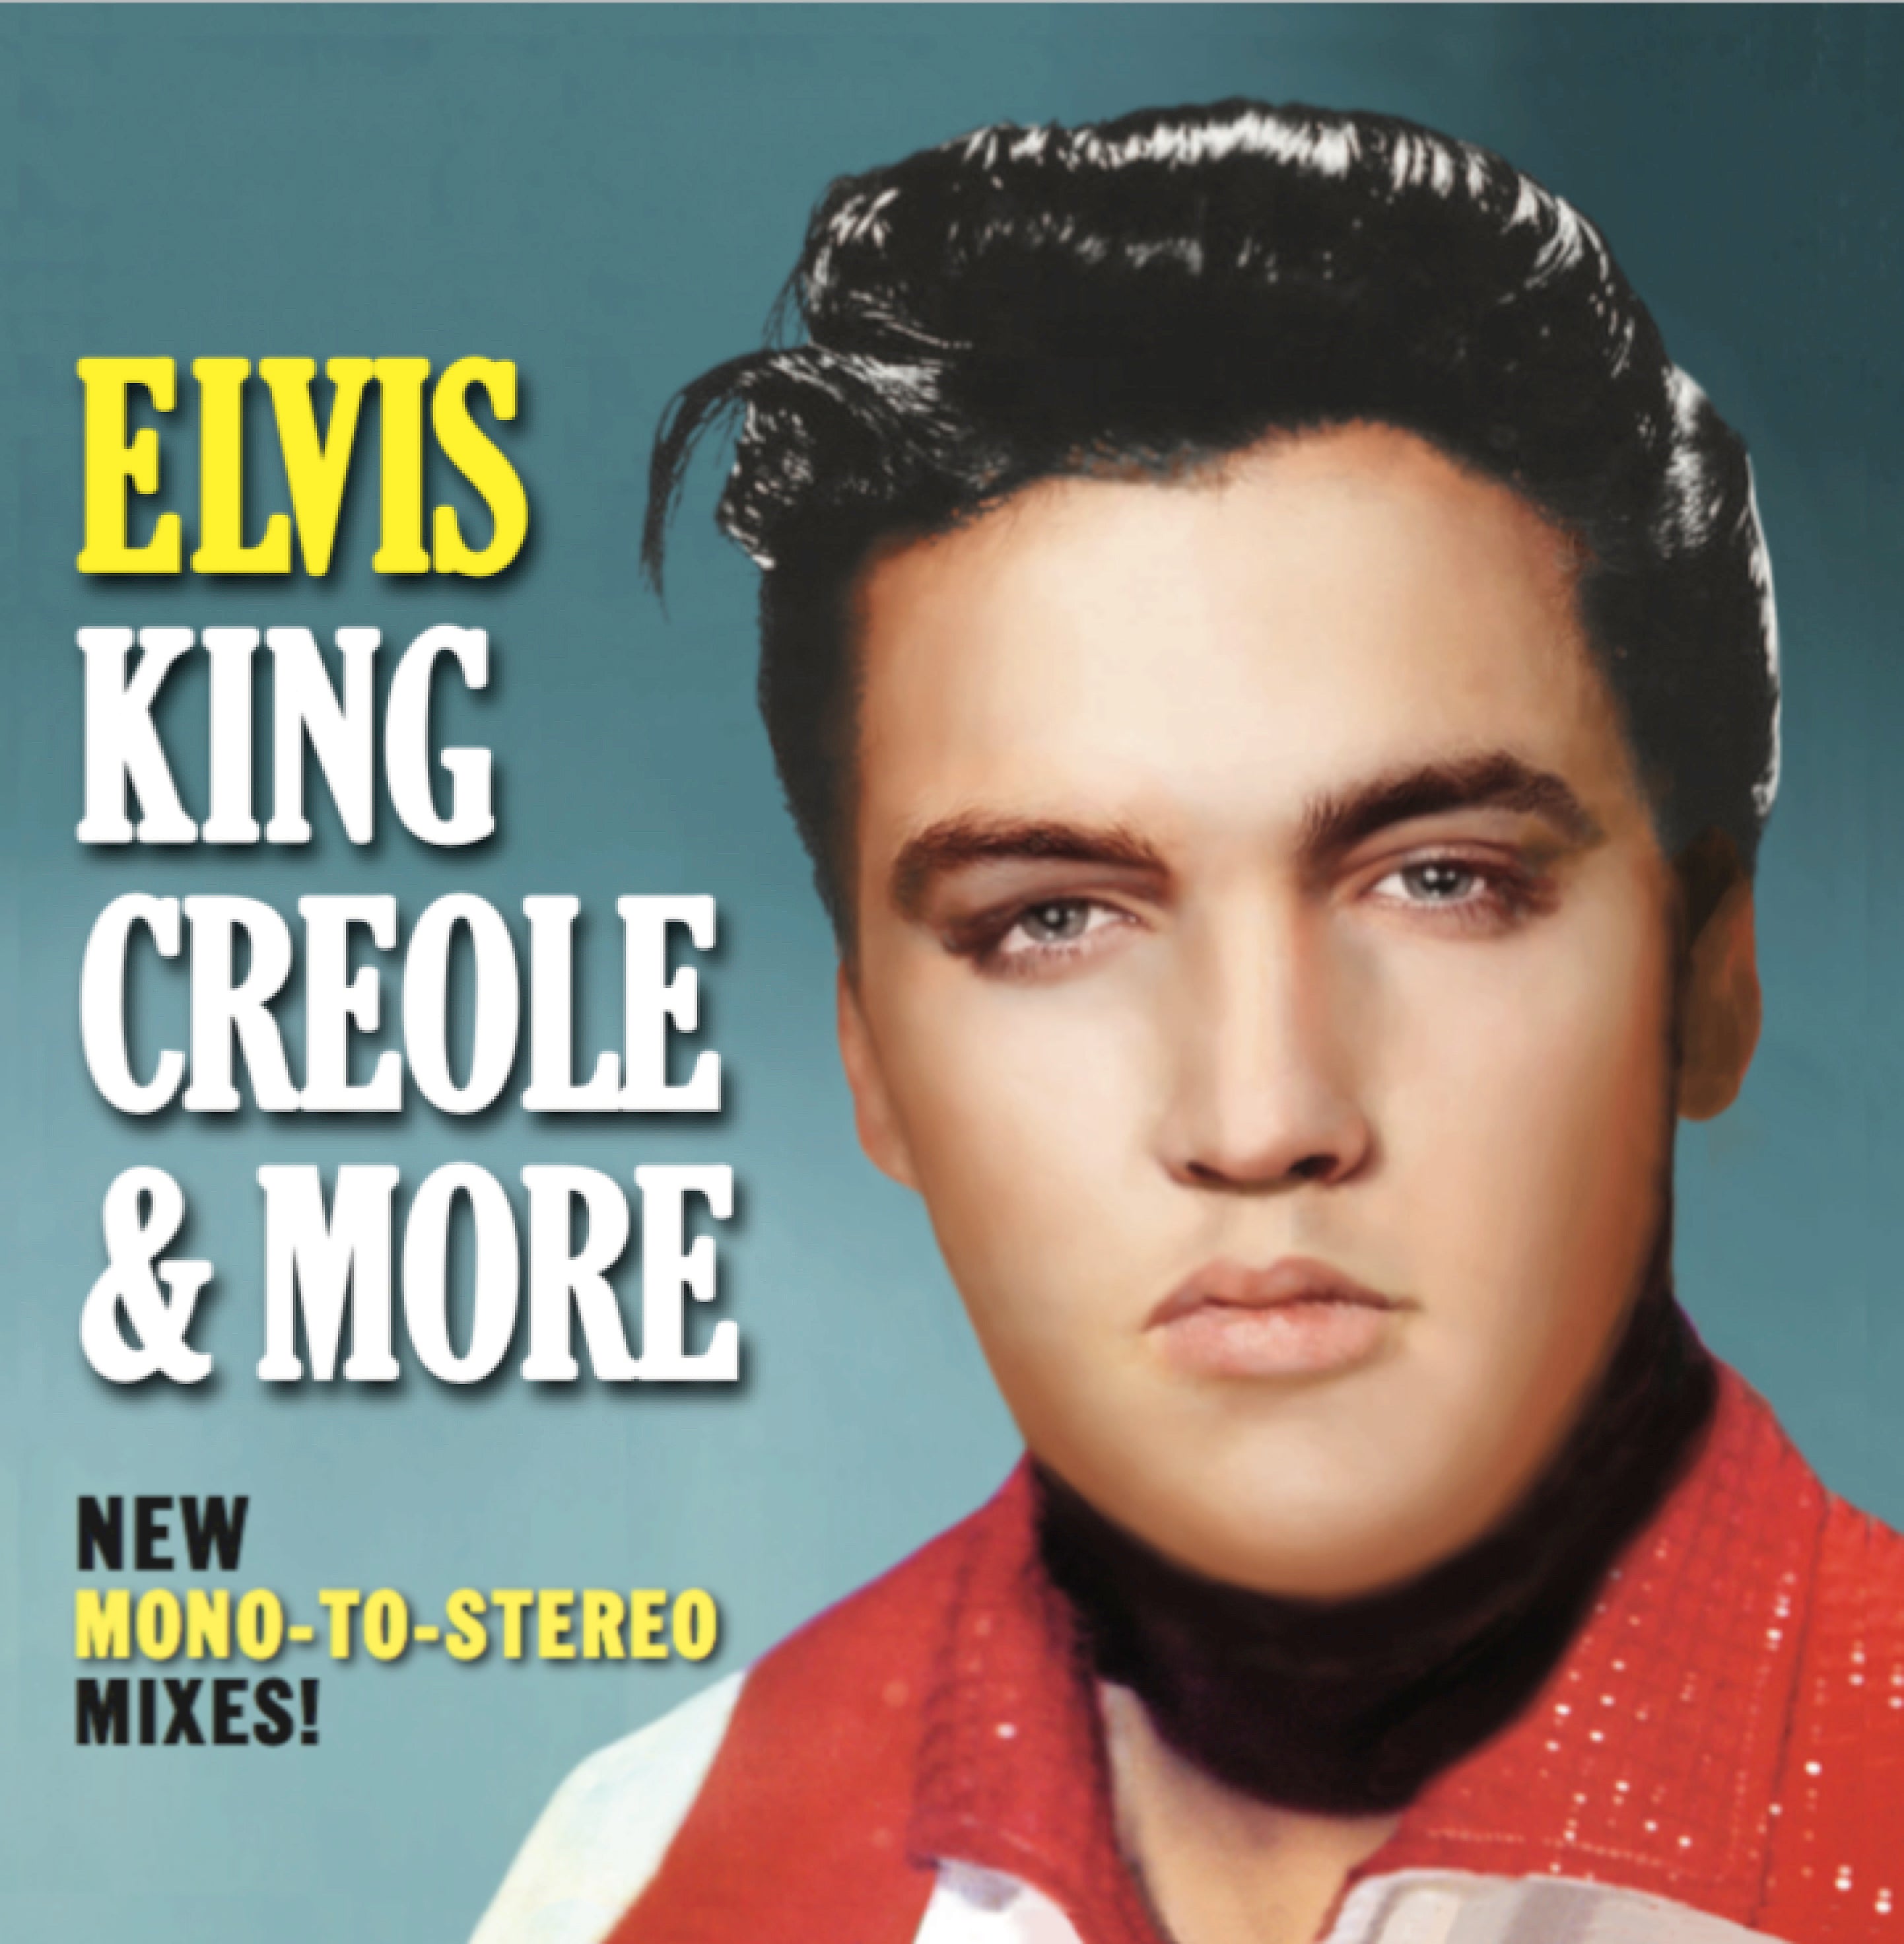 All Shook Up - New Mono to Stereo Mix - song and lyrics by Elvis